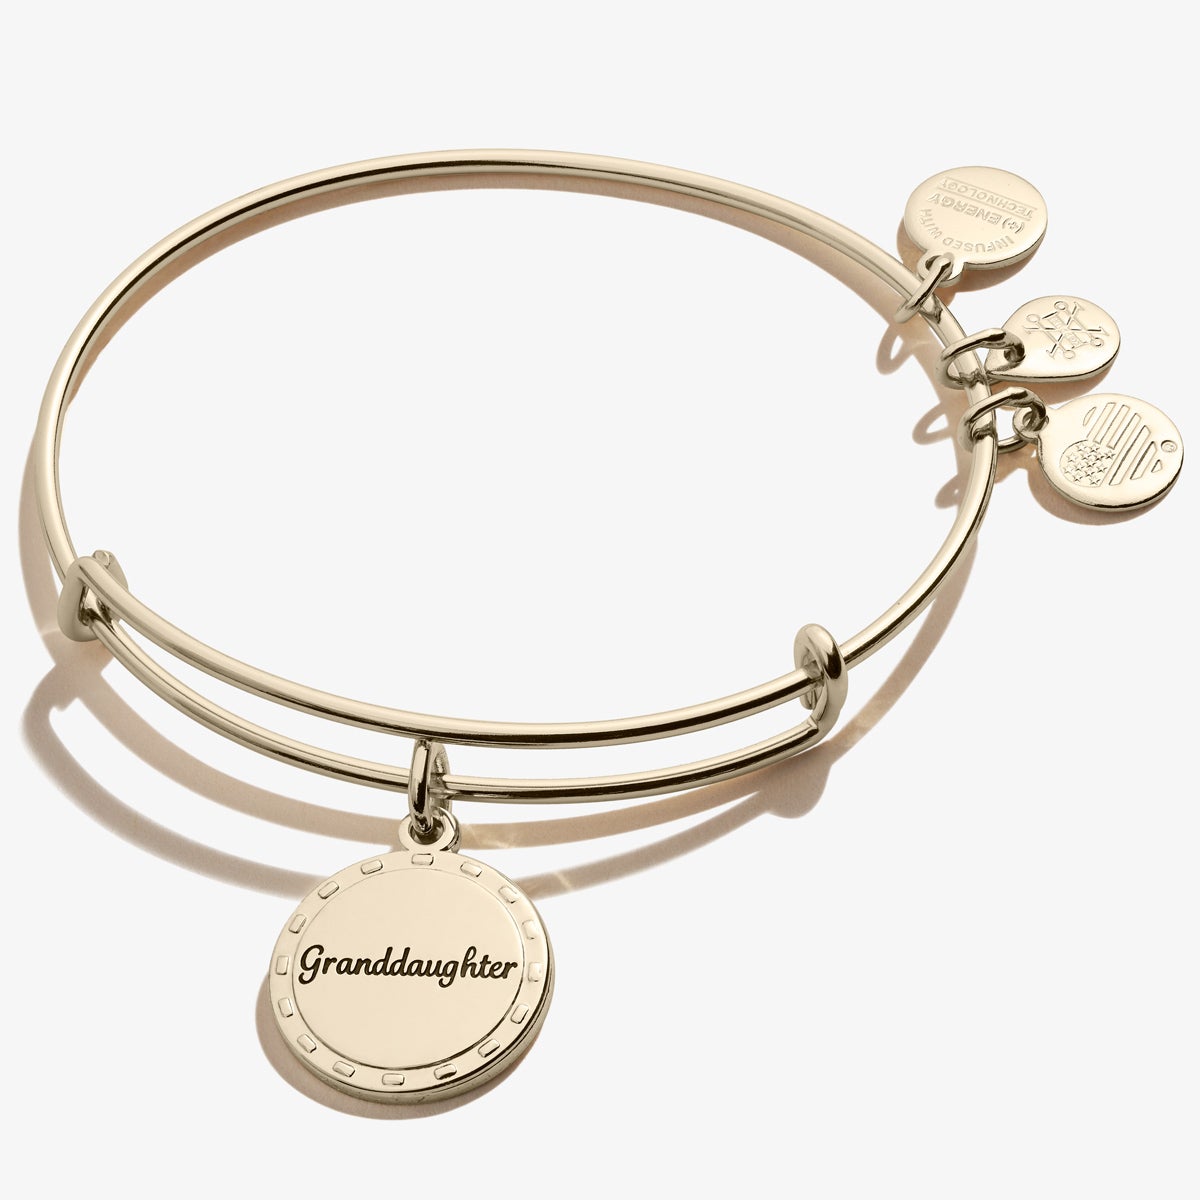 Granddaughter, 'By Your Side' Charm Bangle